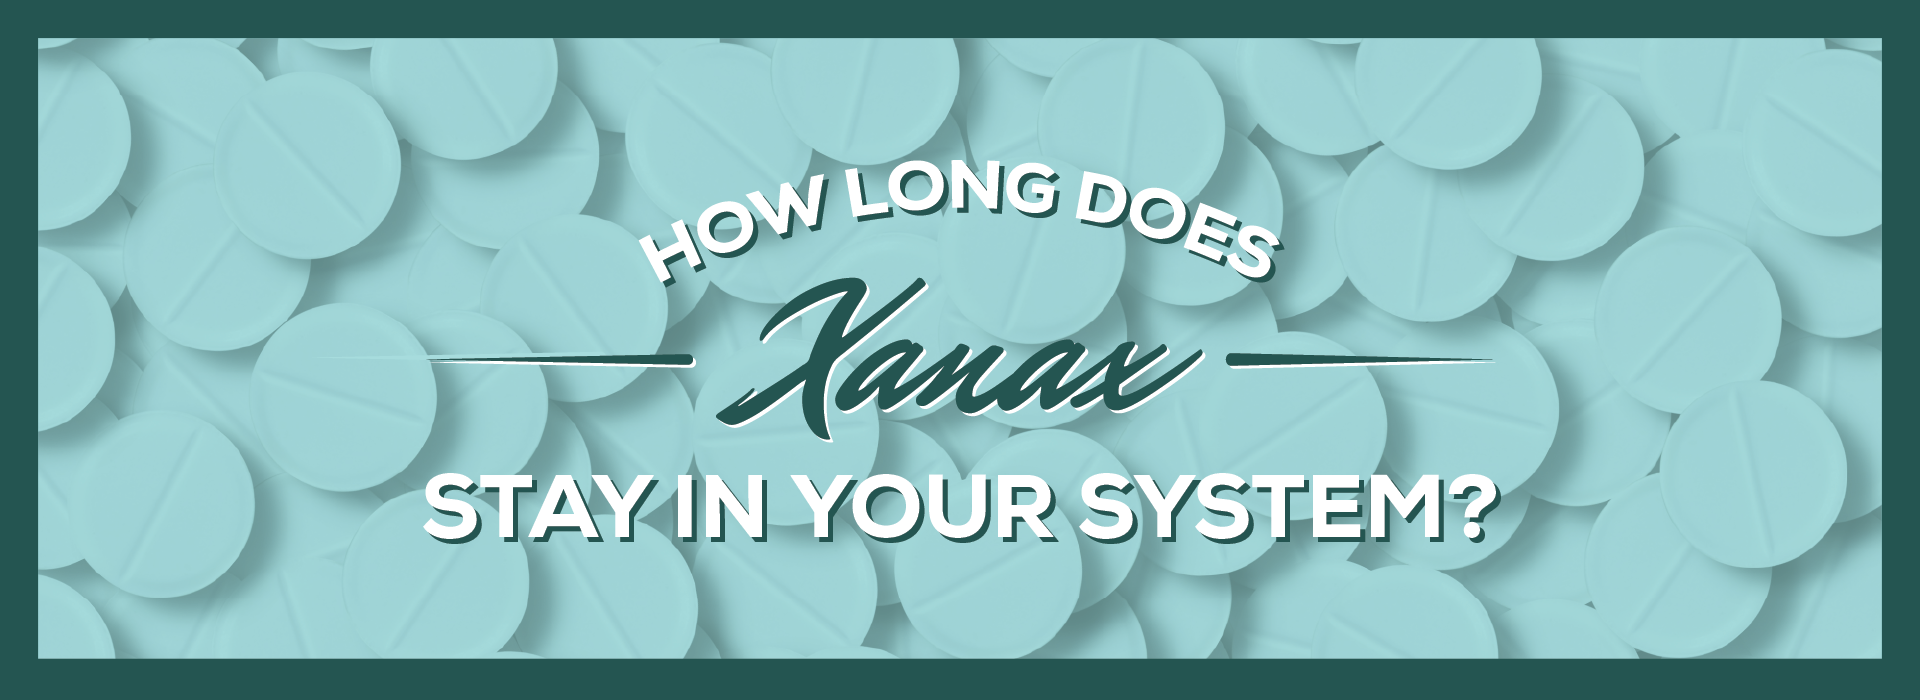 How Long Does Xanax Stay in System Header